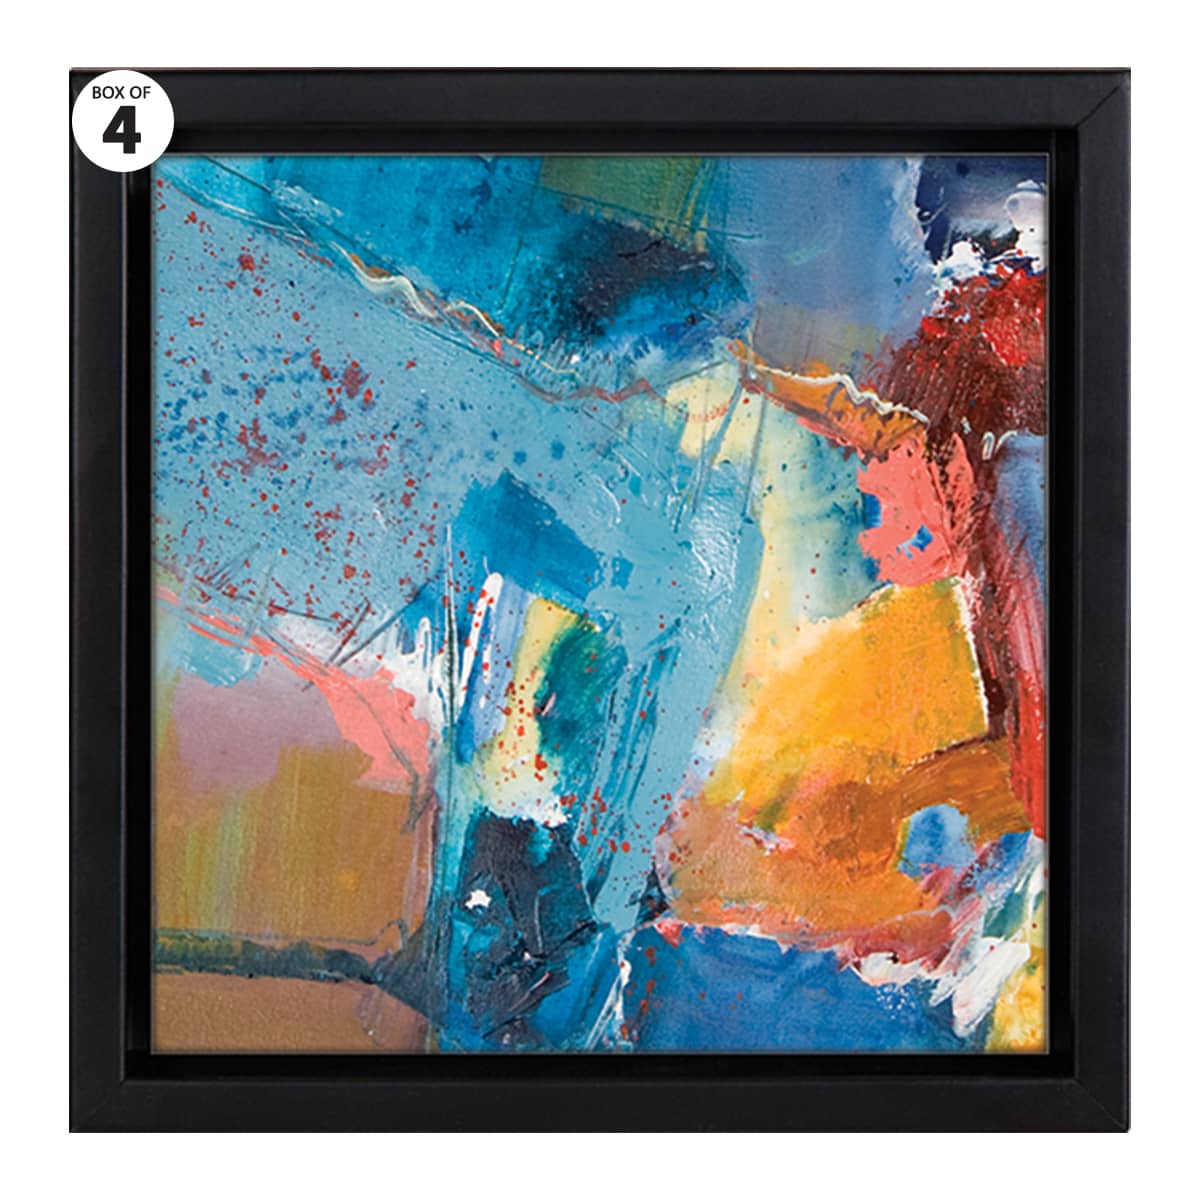 Buy Painting With Mat and Backing Boards, Painting on Art Paper, Palette  Knife Art, Original Abstract Wall Art, Mat 20x16 Painting 14x11 Online in  India 